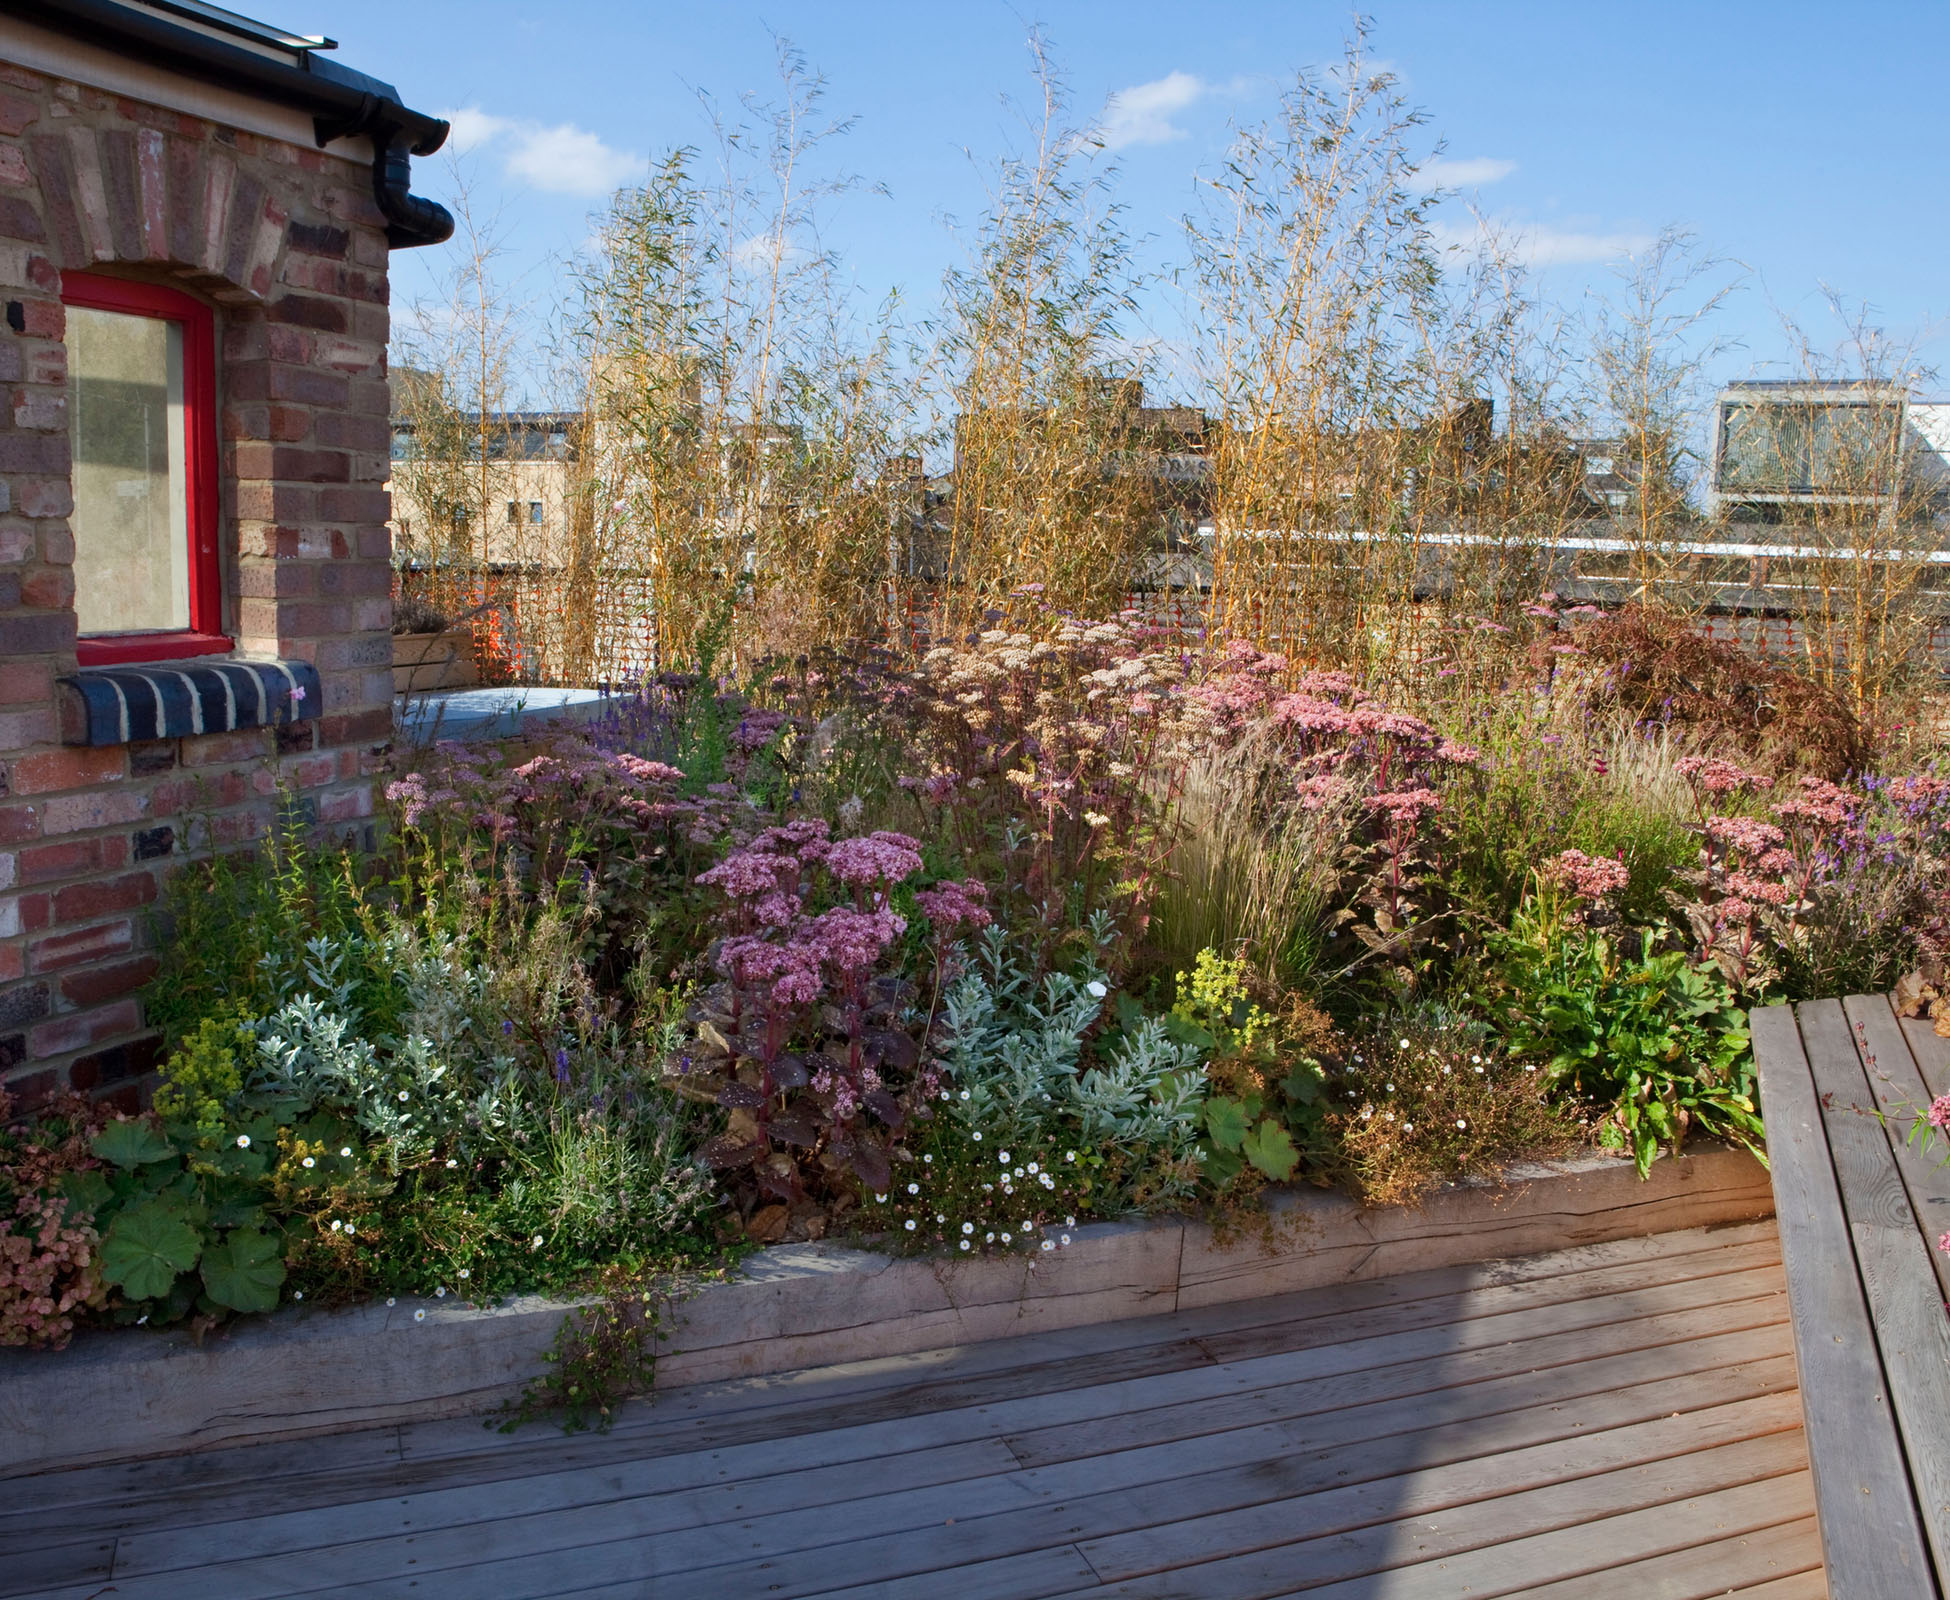 The prairie style planting of this terrace is well suited to the harsh environment of roof gardens